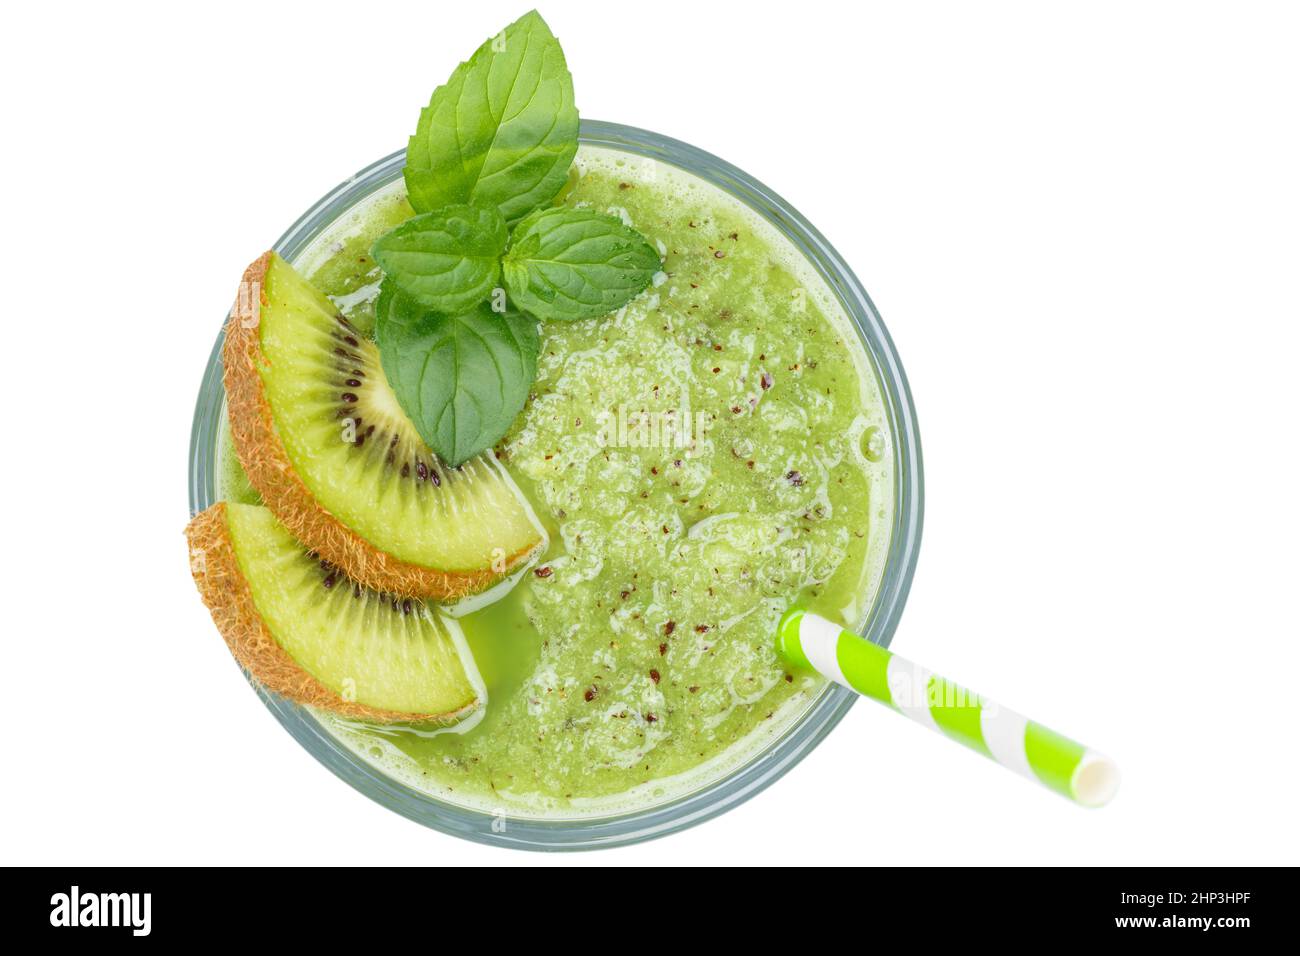 Green smoothie fruit juice drink kiwi in a glass isolated on a white background from above Stock Photo